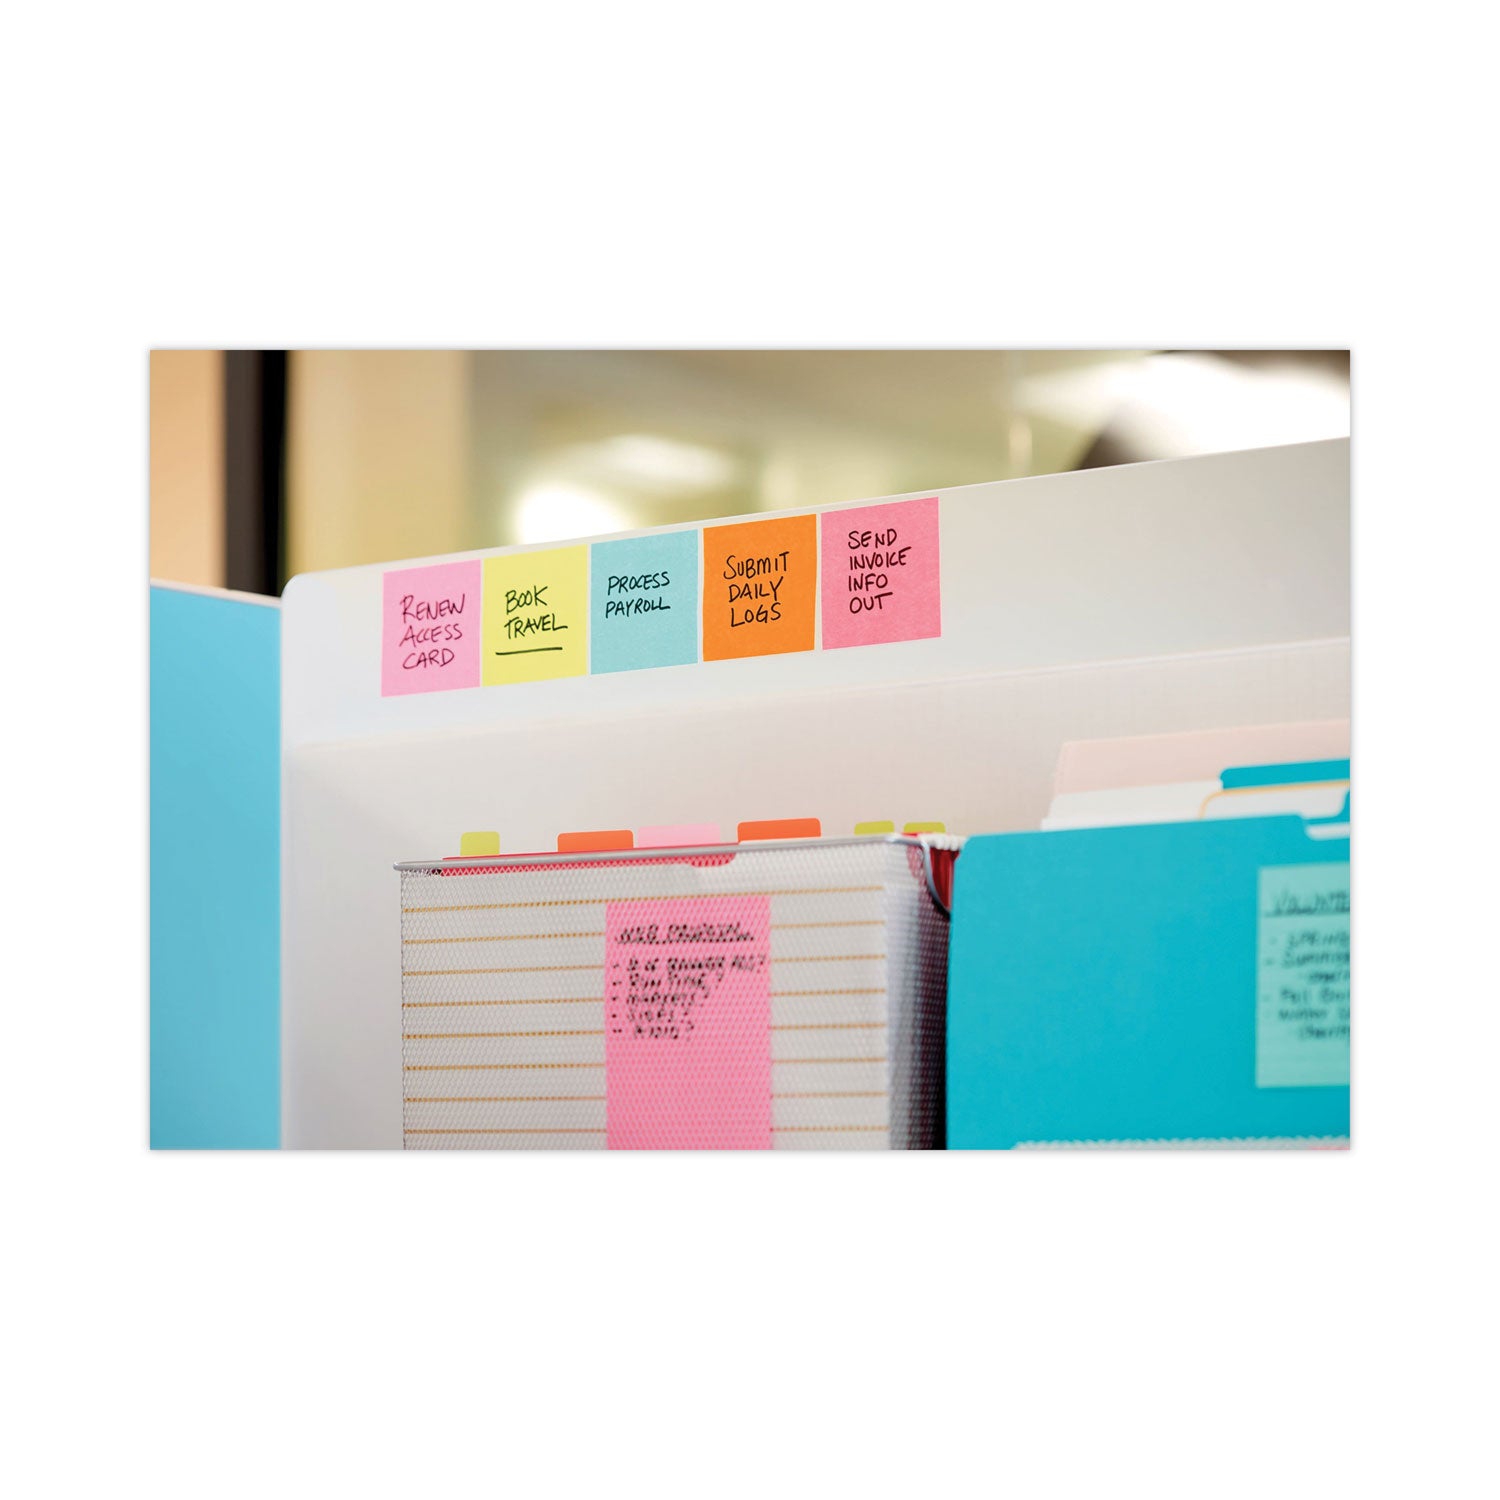 self-stick-notes-office-pack-3-x-3-supernova-neons-collection-colors-90-sheets-pad-24-pads-pack_mmm65424sscym - 3